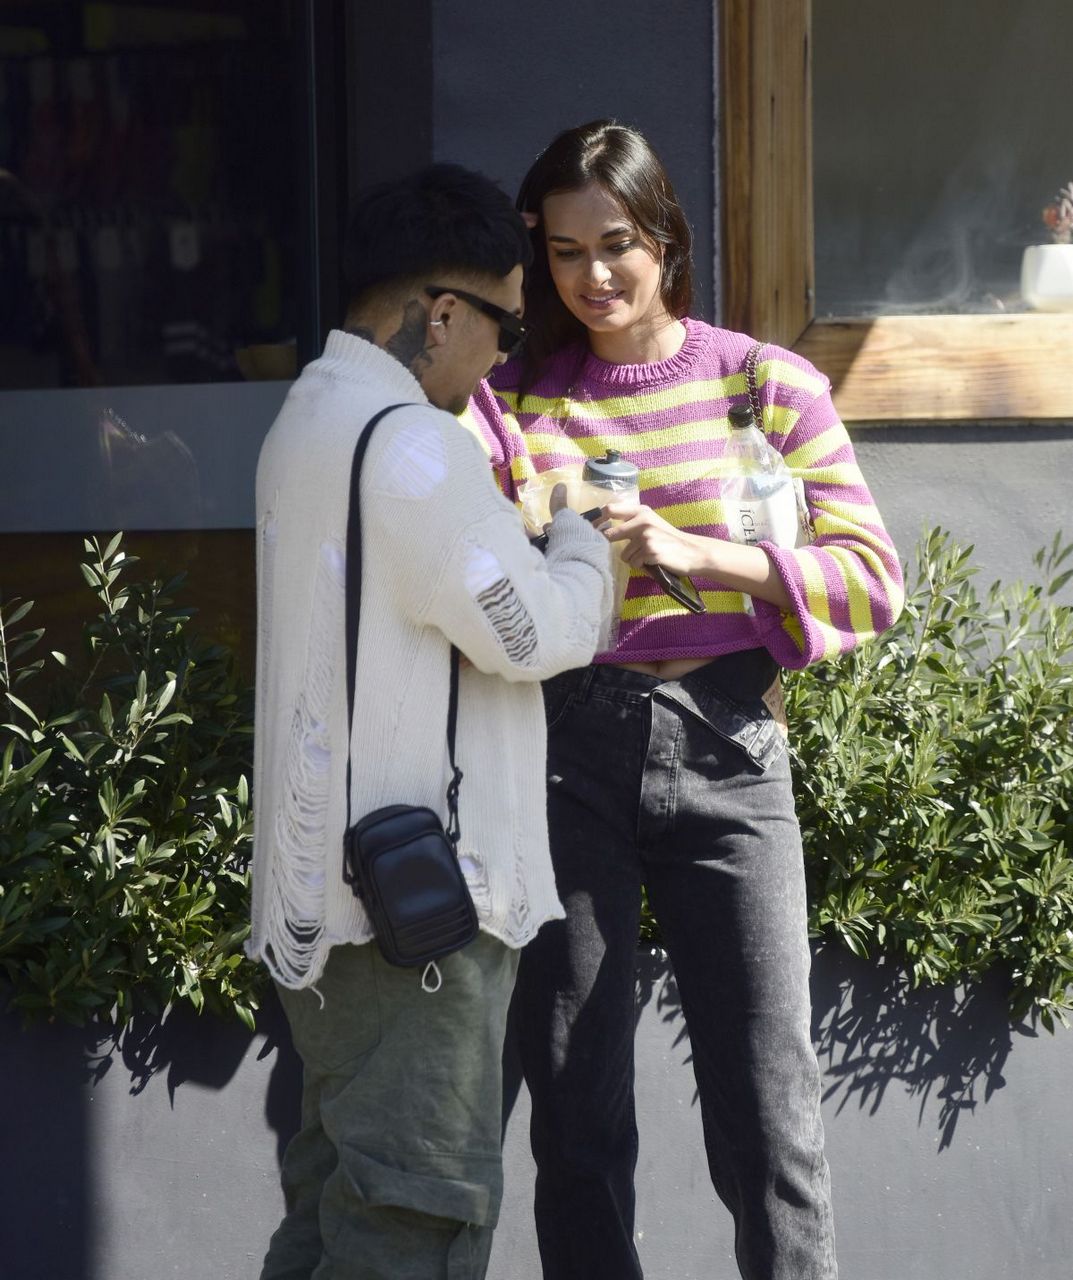 Gizele Oliveira Sharing Croissant With Guy Out Los Angeles